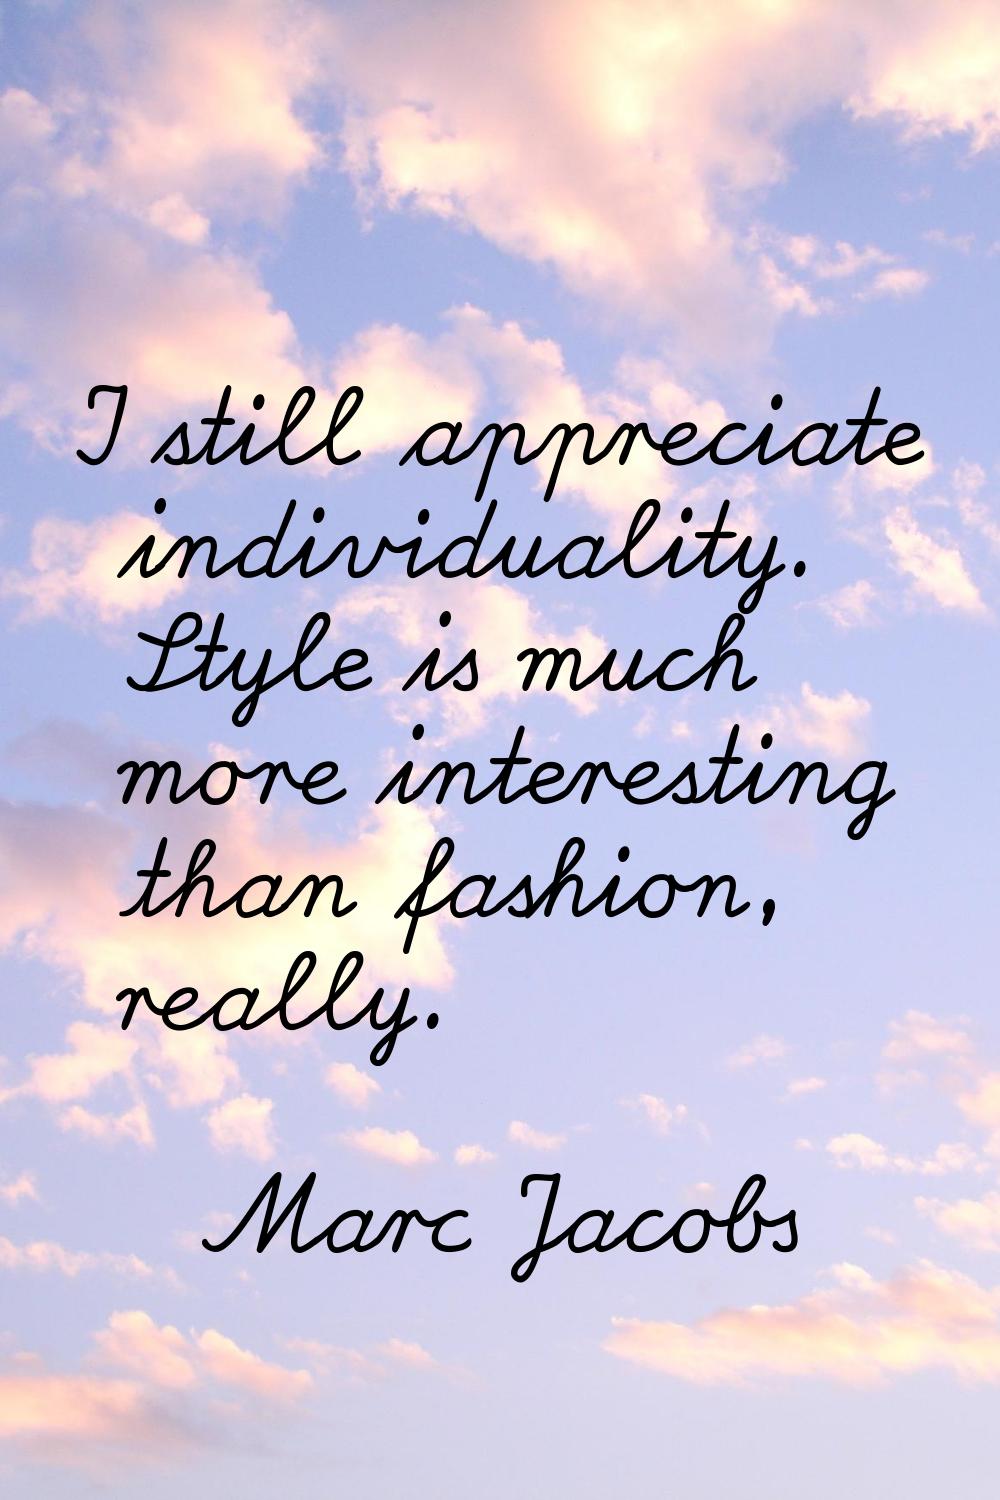 I still appreciate individuality. Style is much more interesting than fashion, really.